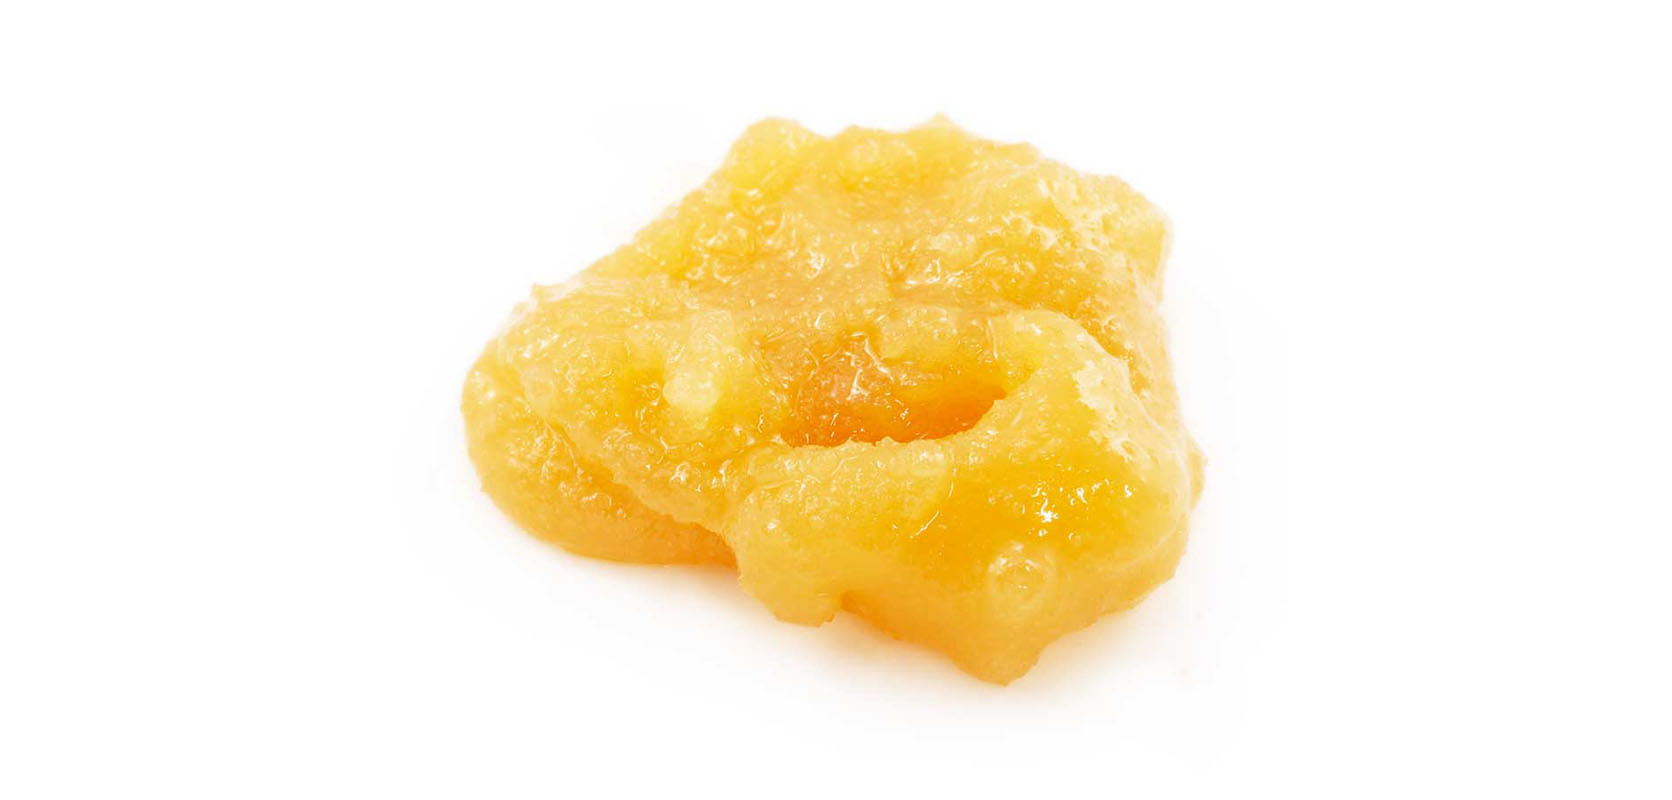 OG Kush live resin THC concentrate for sale online in Canada. Weed dispensary for cannabis concentrates. Buy mail order marijuana dispensary weed.